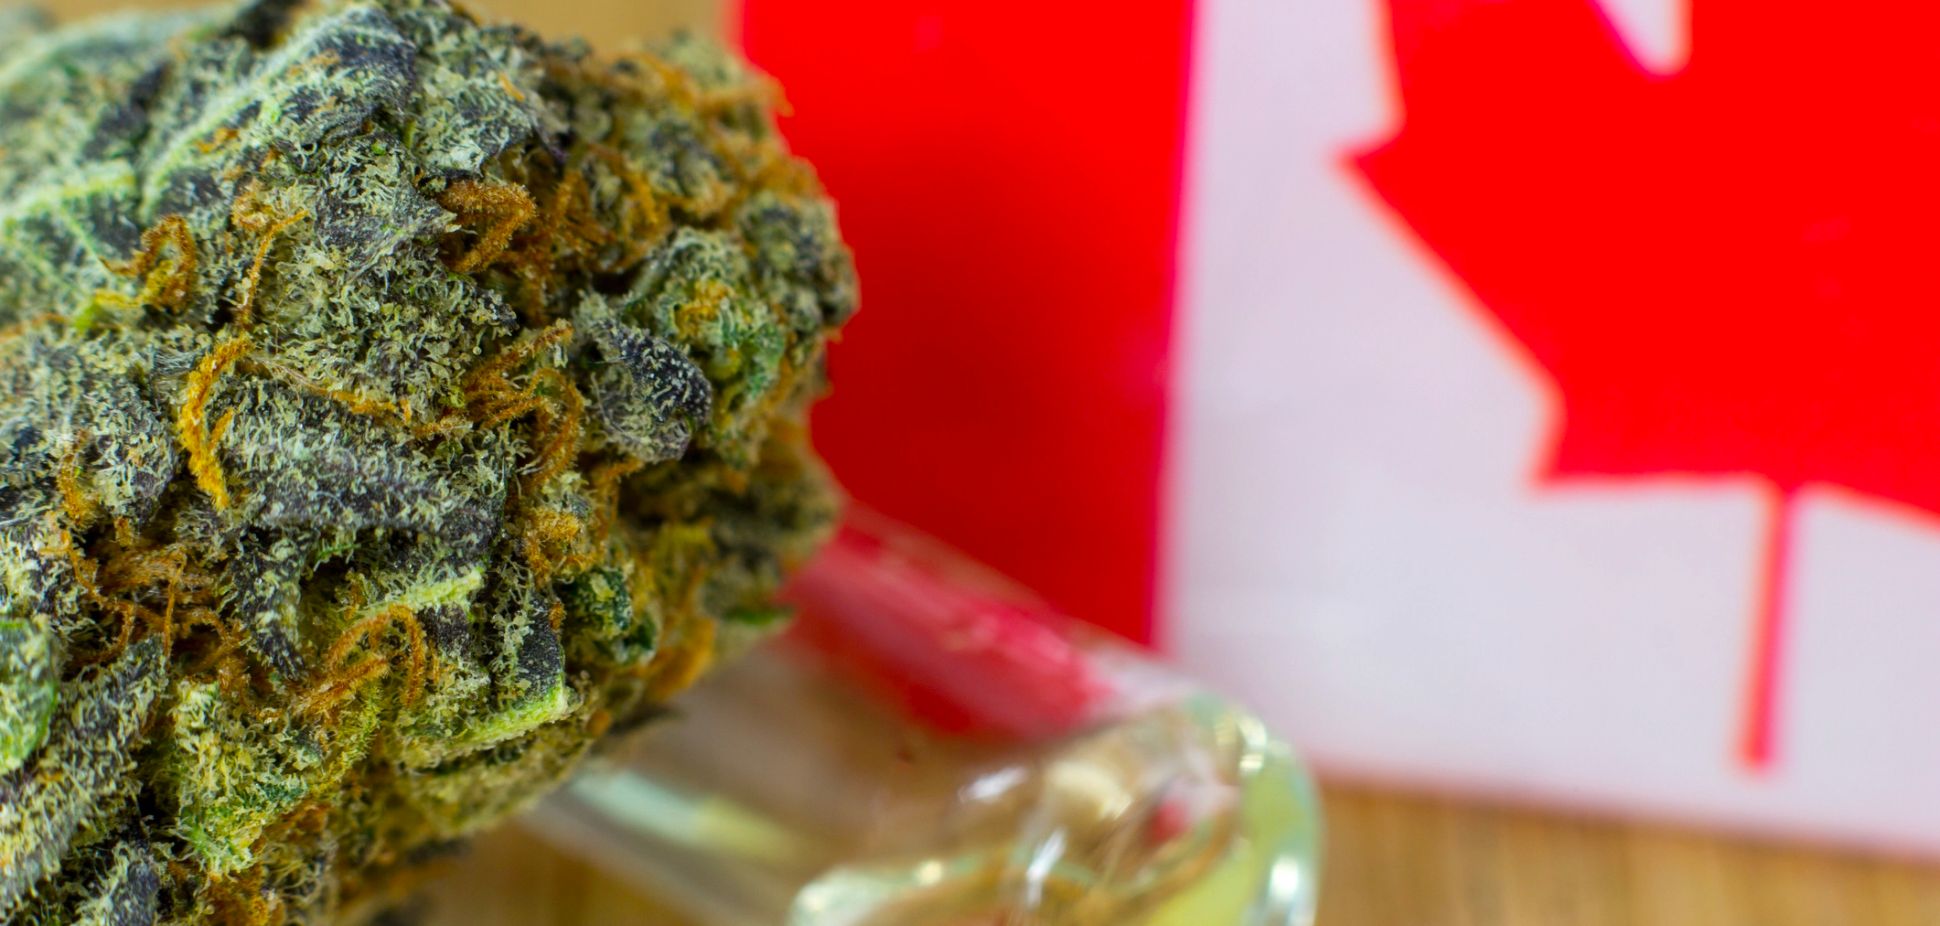 Behind the Hype: What's Really Happening in Canada's Cannabis Industry